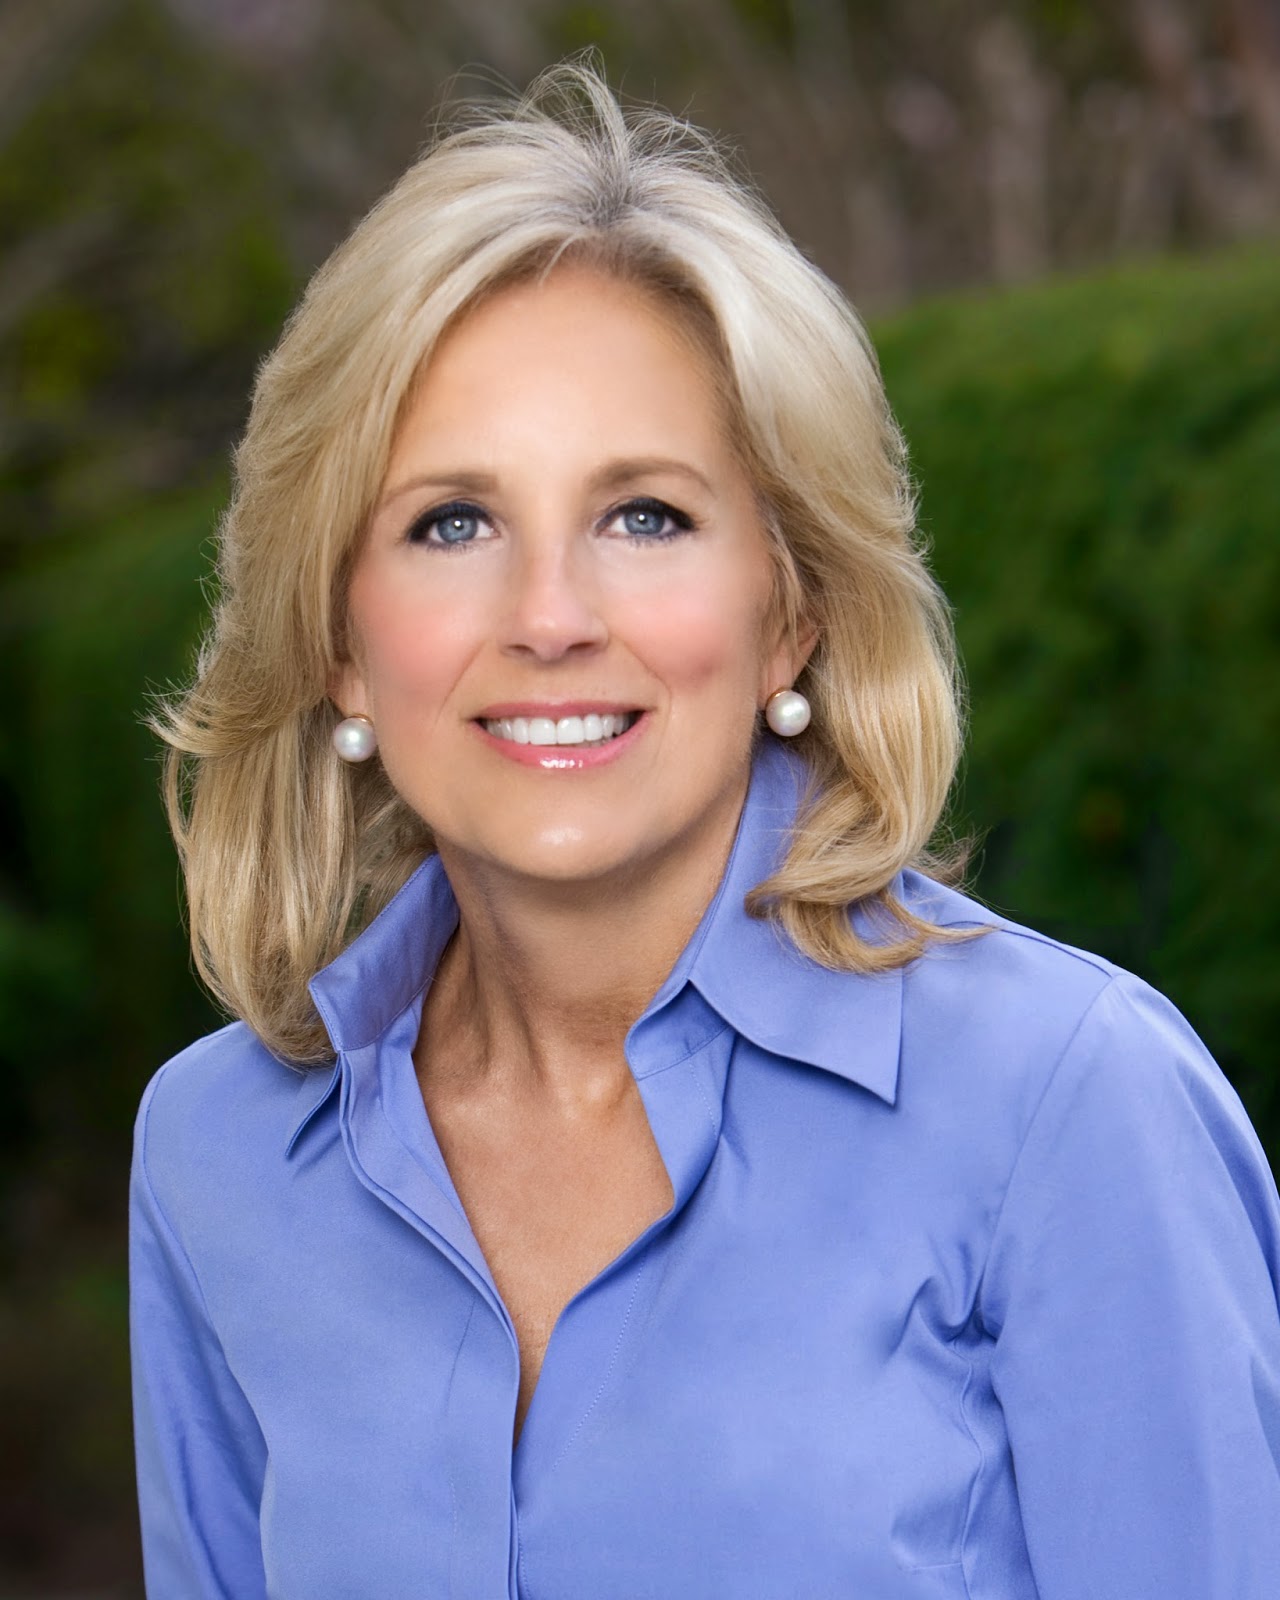 Why Women Are All Riled Up About Jill Biden | Law.com